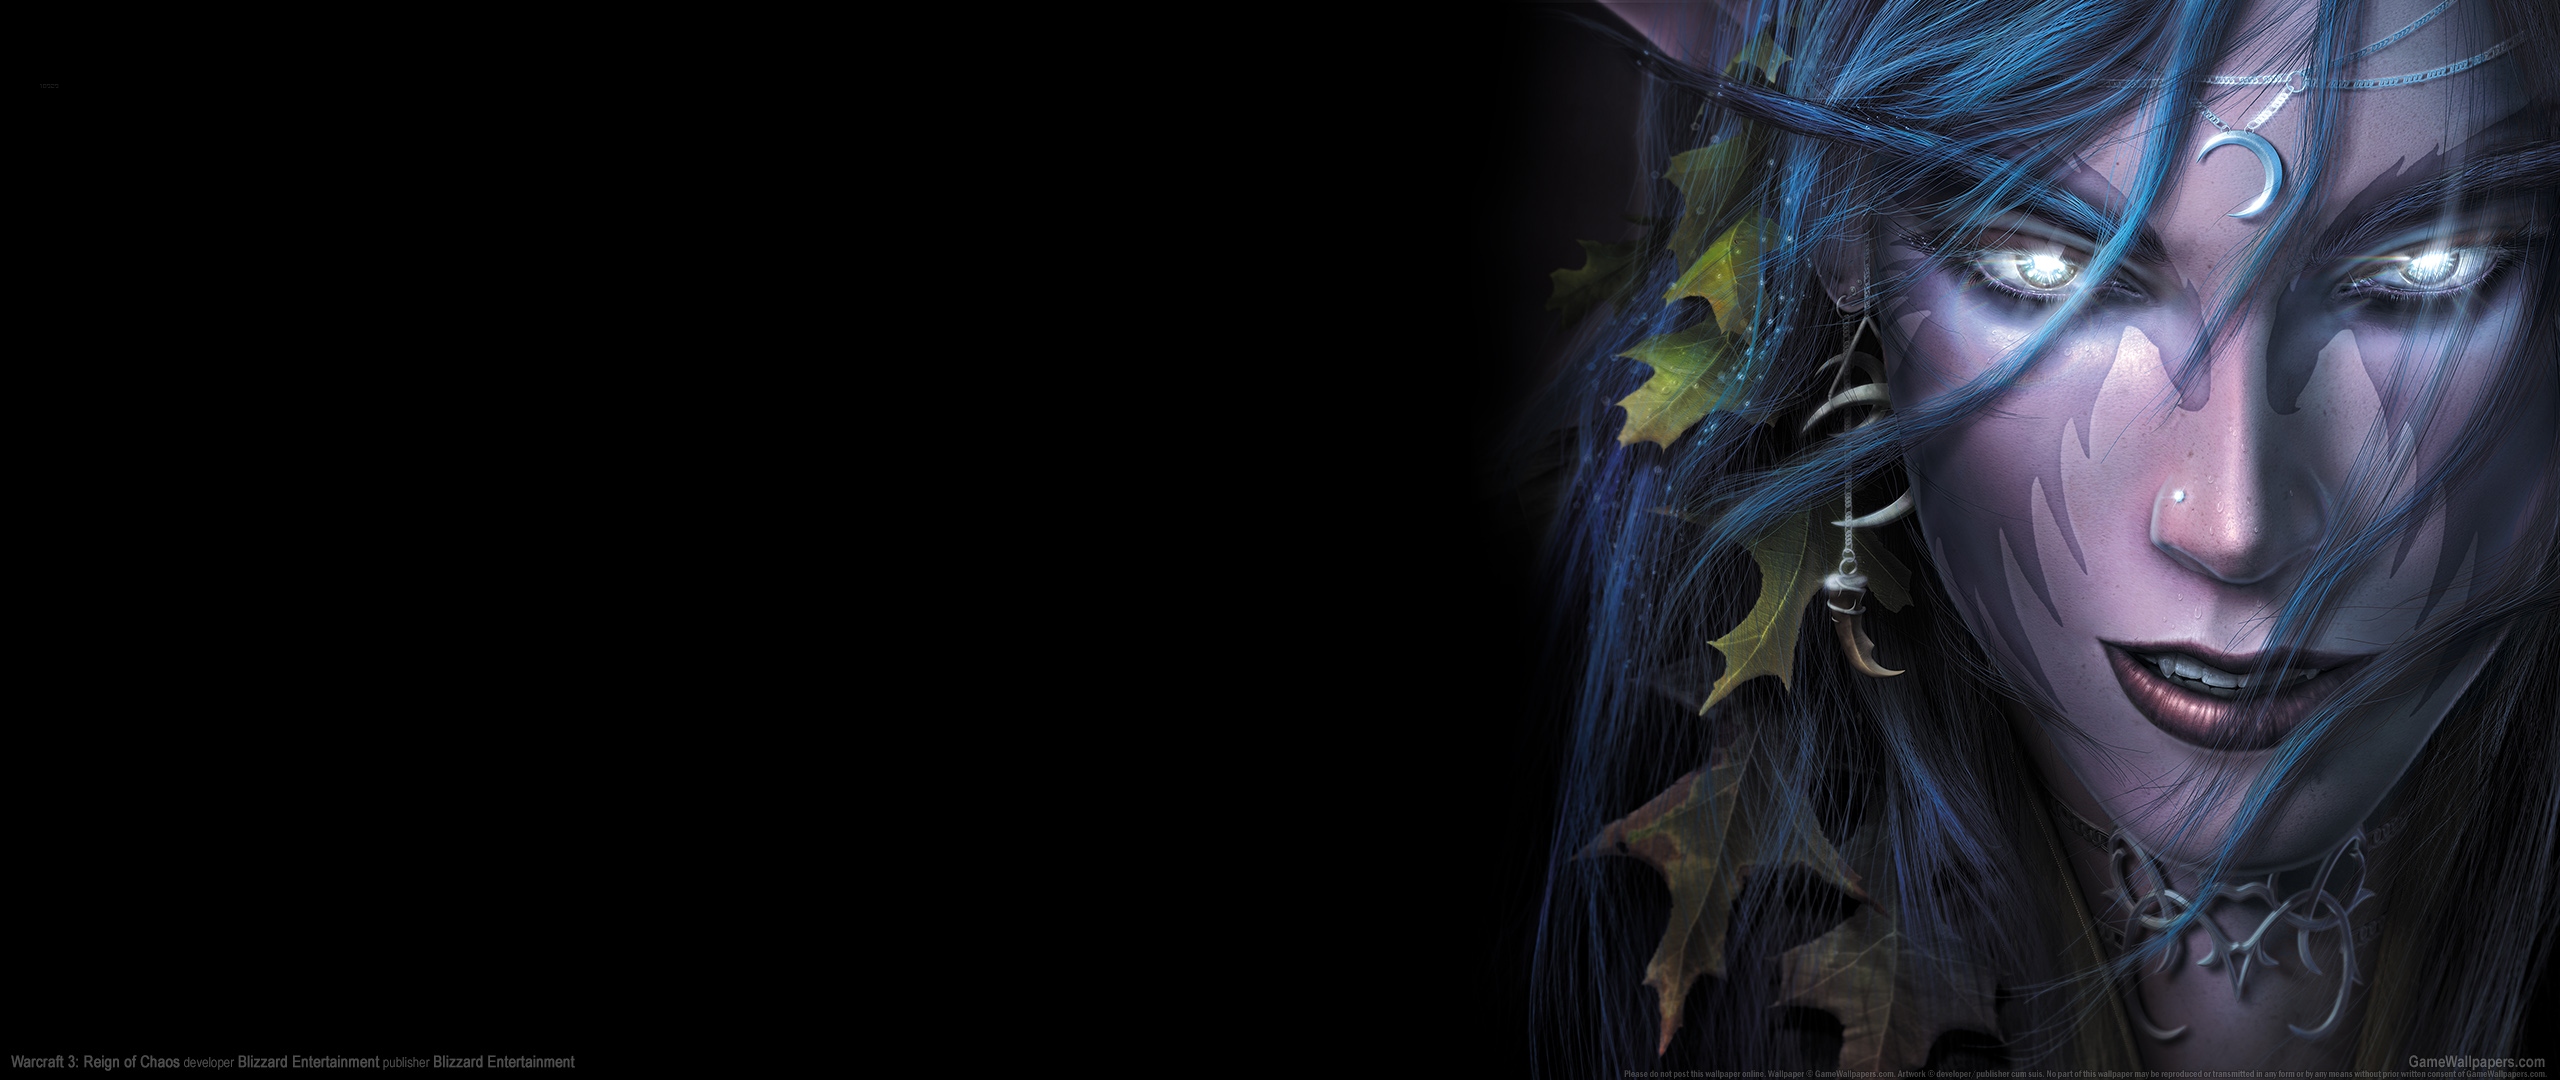 Warcraft 3: Reign of Chaos 2560x1080 wallpaper or background 23